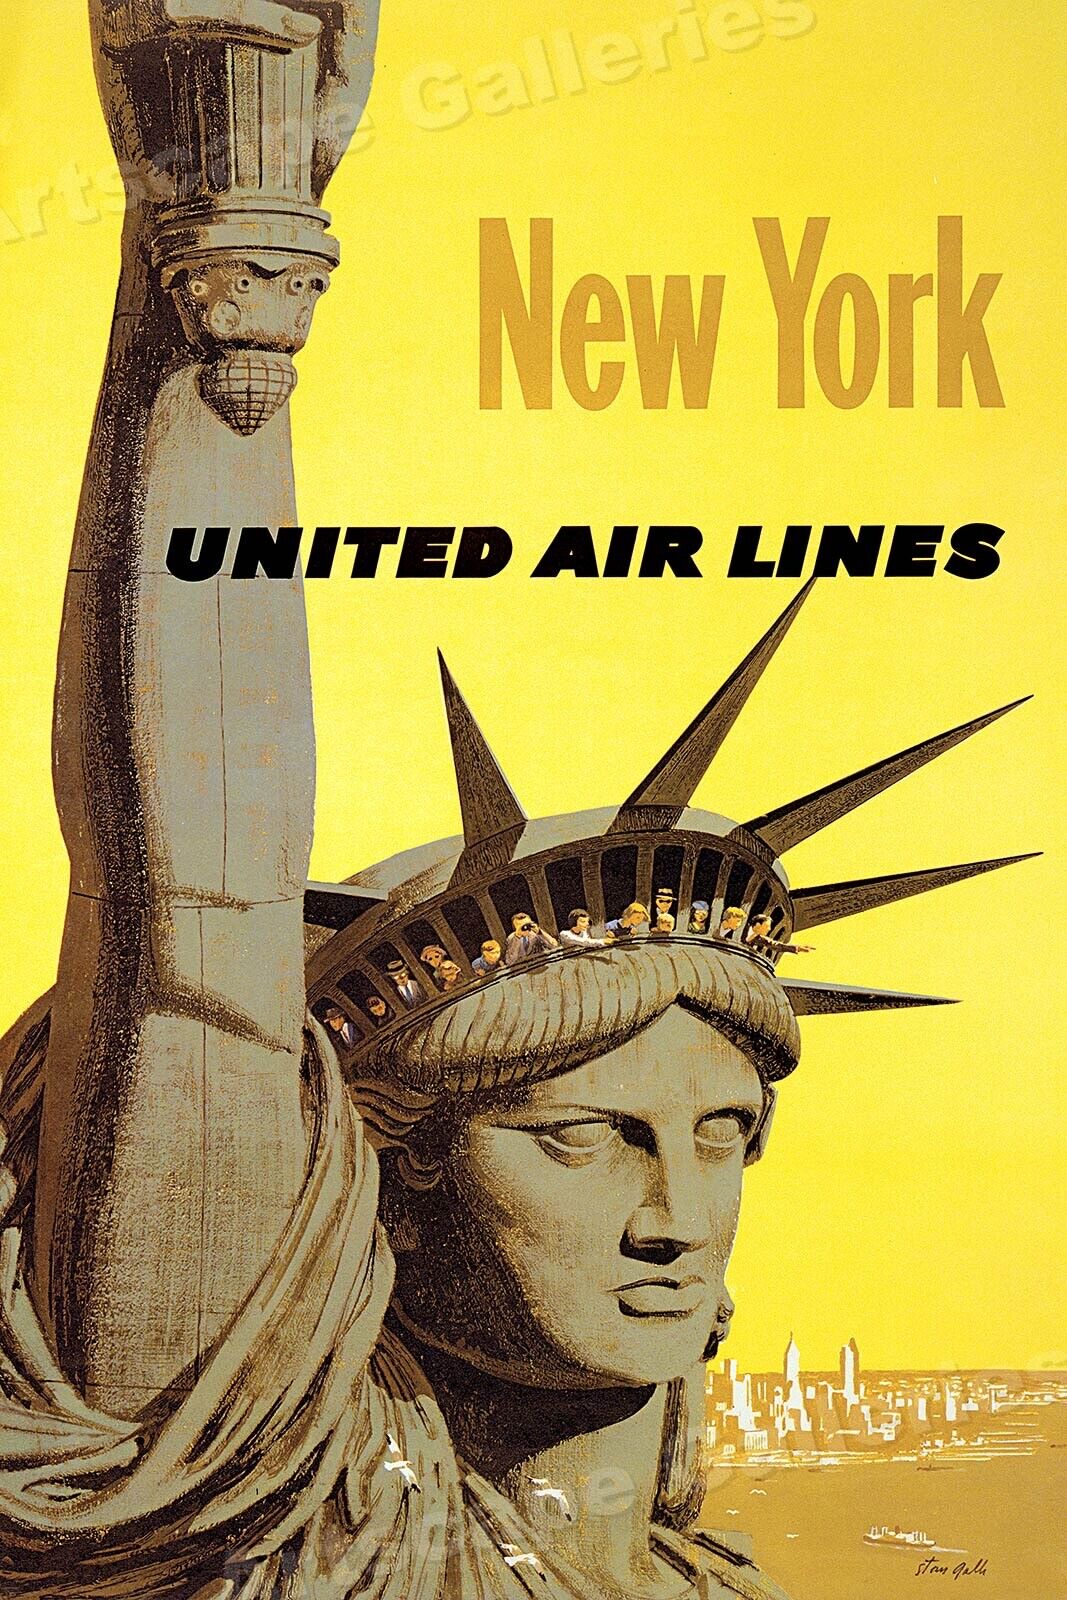 1960s Visit New York City Vintage Style Airline Travel Poster - 16x24